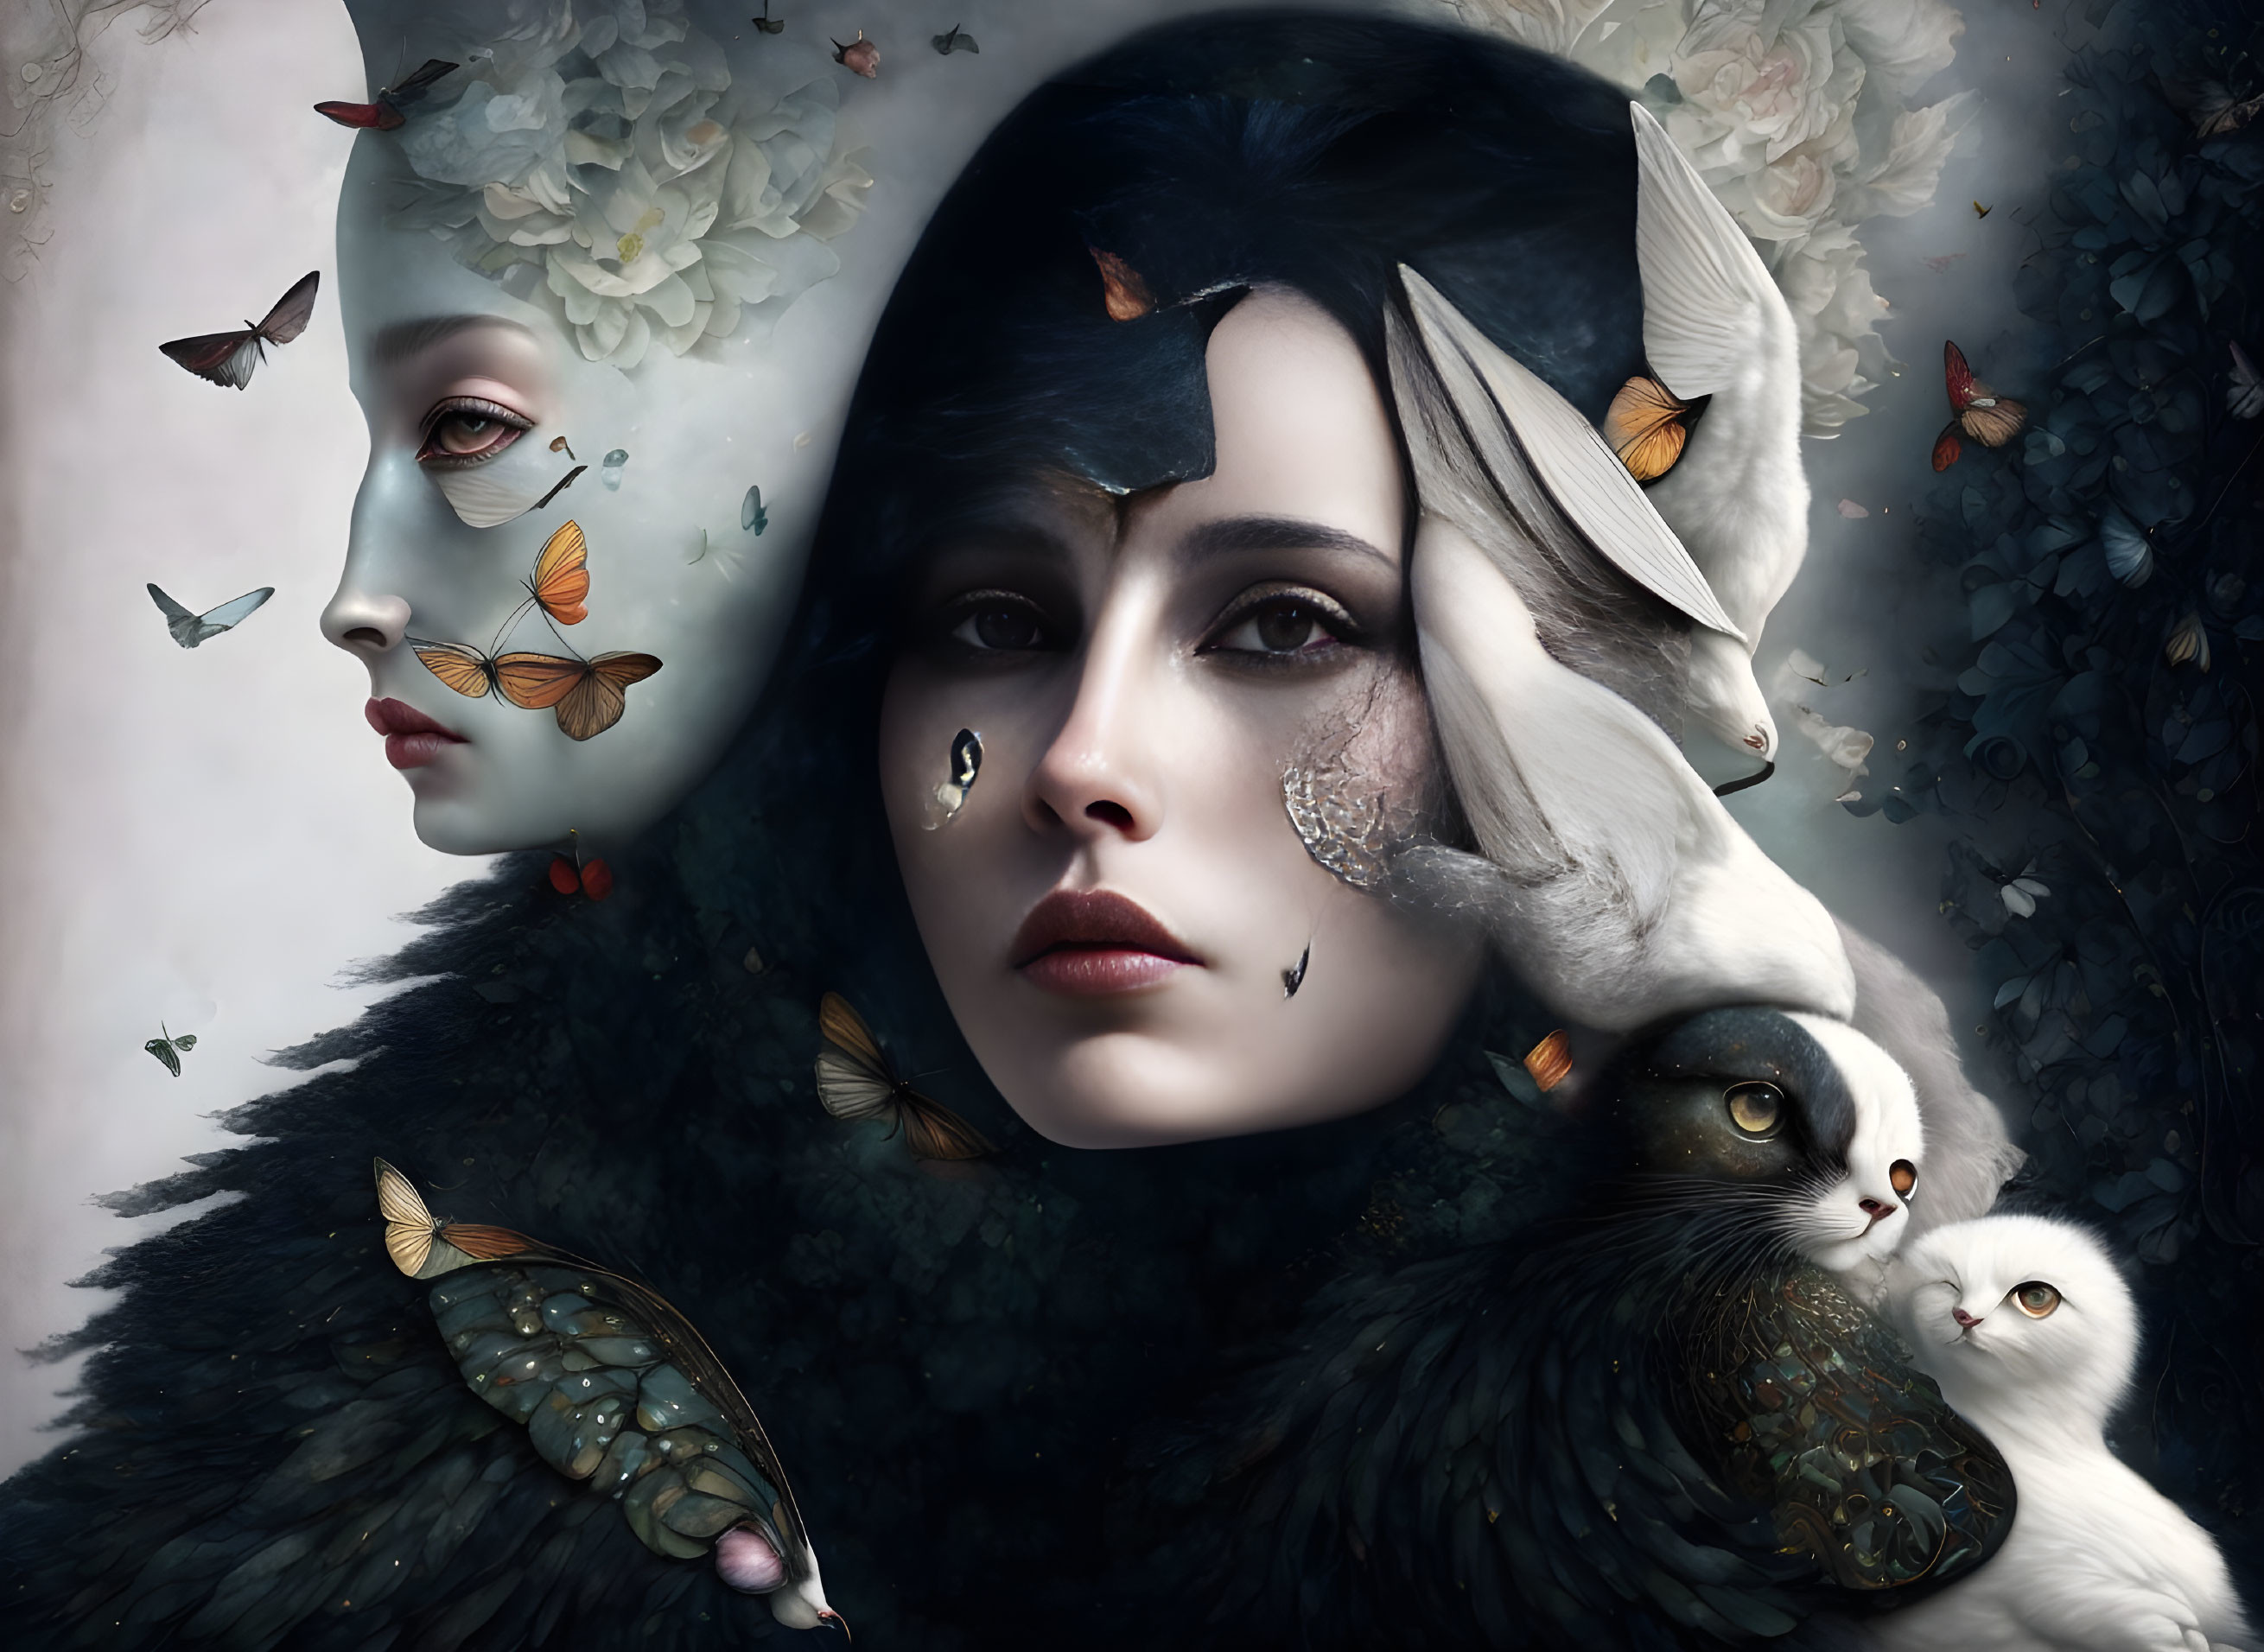 Surreal portrait of woman with split visage merging with cat's face surrounded by butterflies